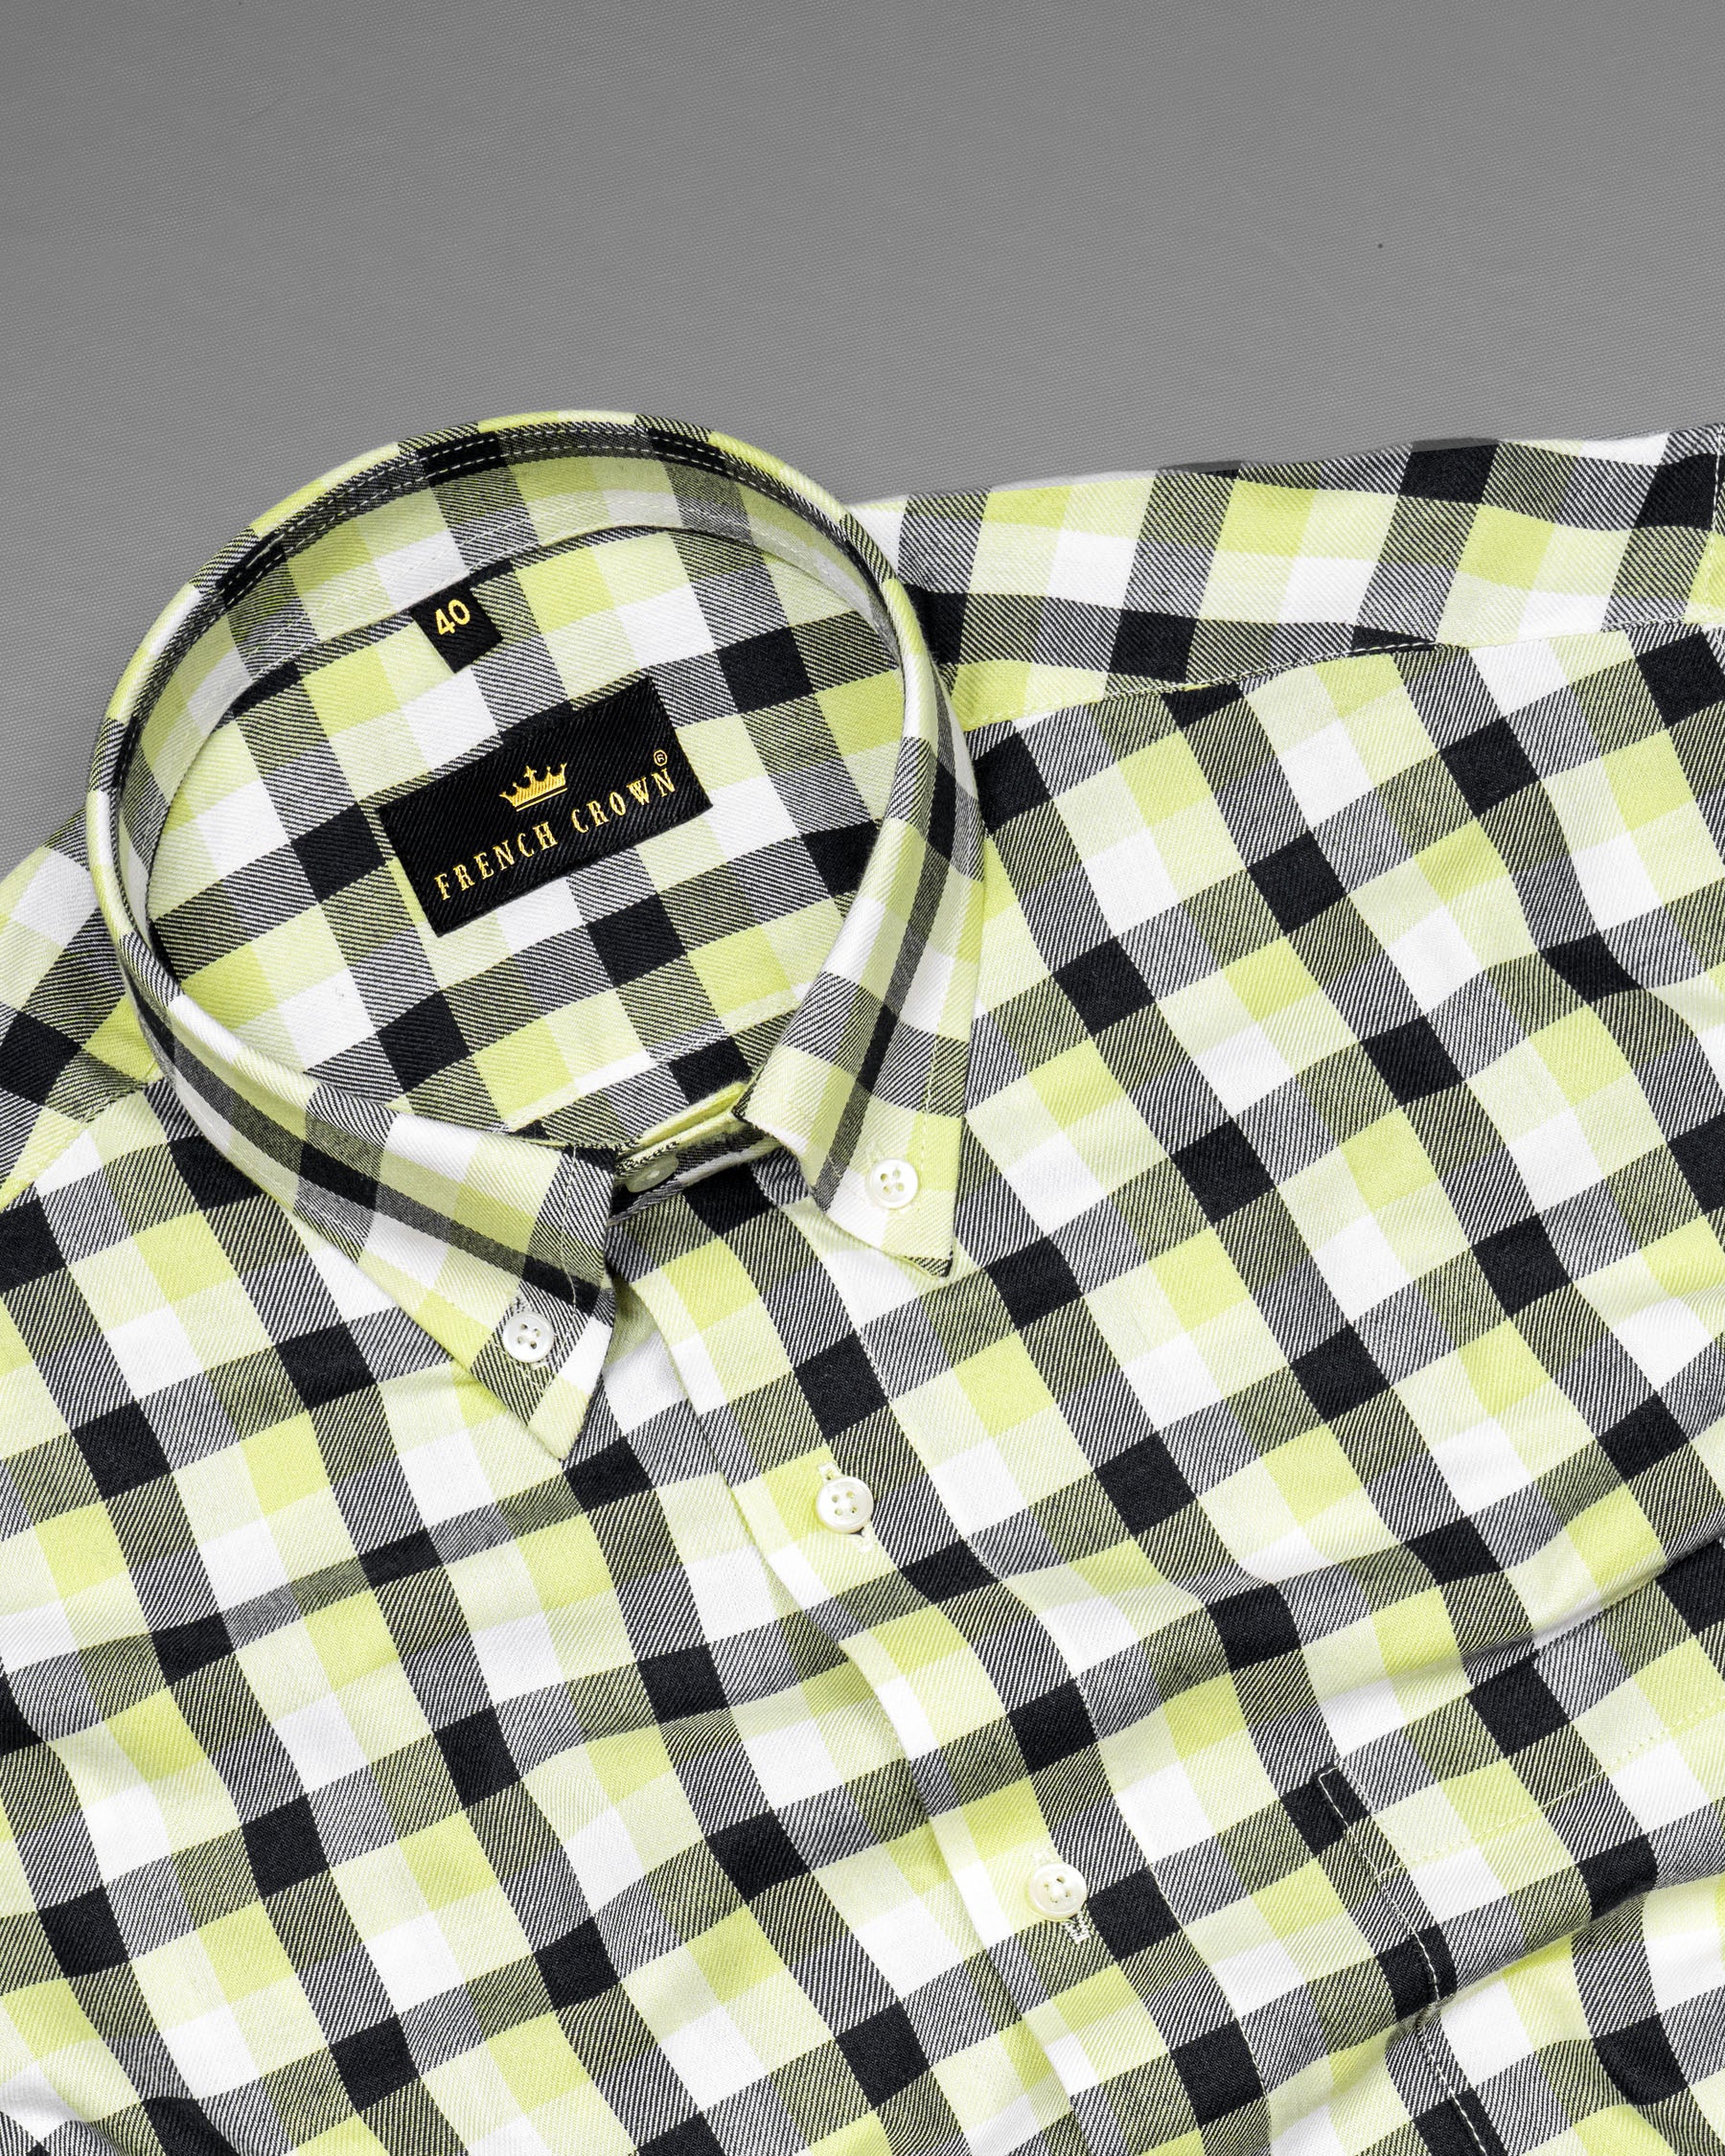 Jade Black with Pale Goldenrod Twill Plaid Premium Cotton Shirt 5700-BD-38, 5700-BD-H-38, 5700-BD-39, 5700-BD-H-39, 5700-BD-40, 5700-BD-H-40, 5700-BD-42, 5700-BD-H-42, 5700-BD-44, 5700-BD-H-44, 5700-BD-46, 5700-BD-H-46, 5700-BD-48, 5700-BD-H-48, 5700-BD-50, 5700-BD-H-50, 5700-BD-52, 5700-BD-H-52